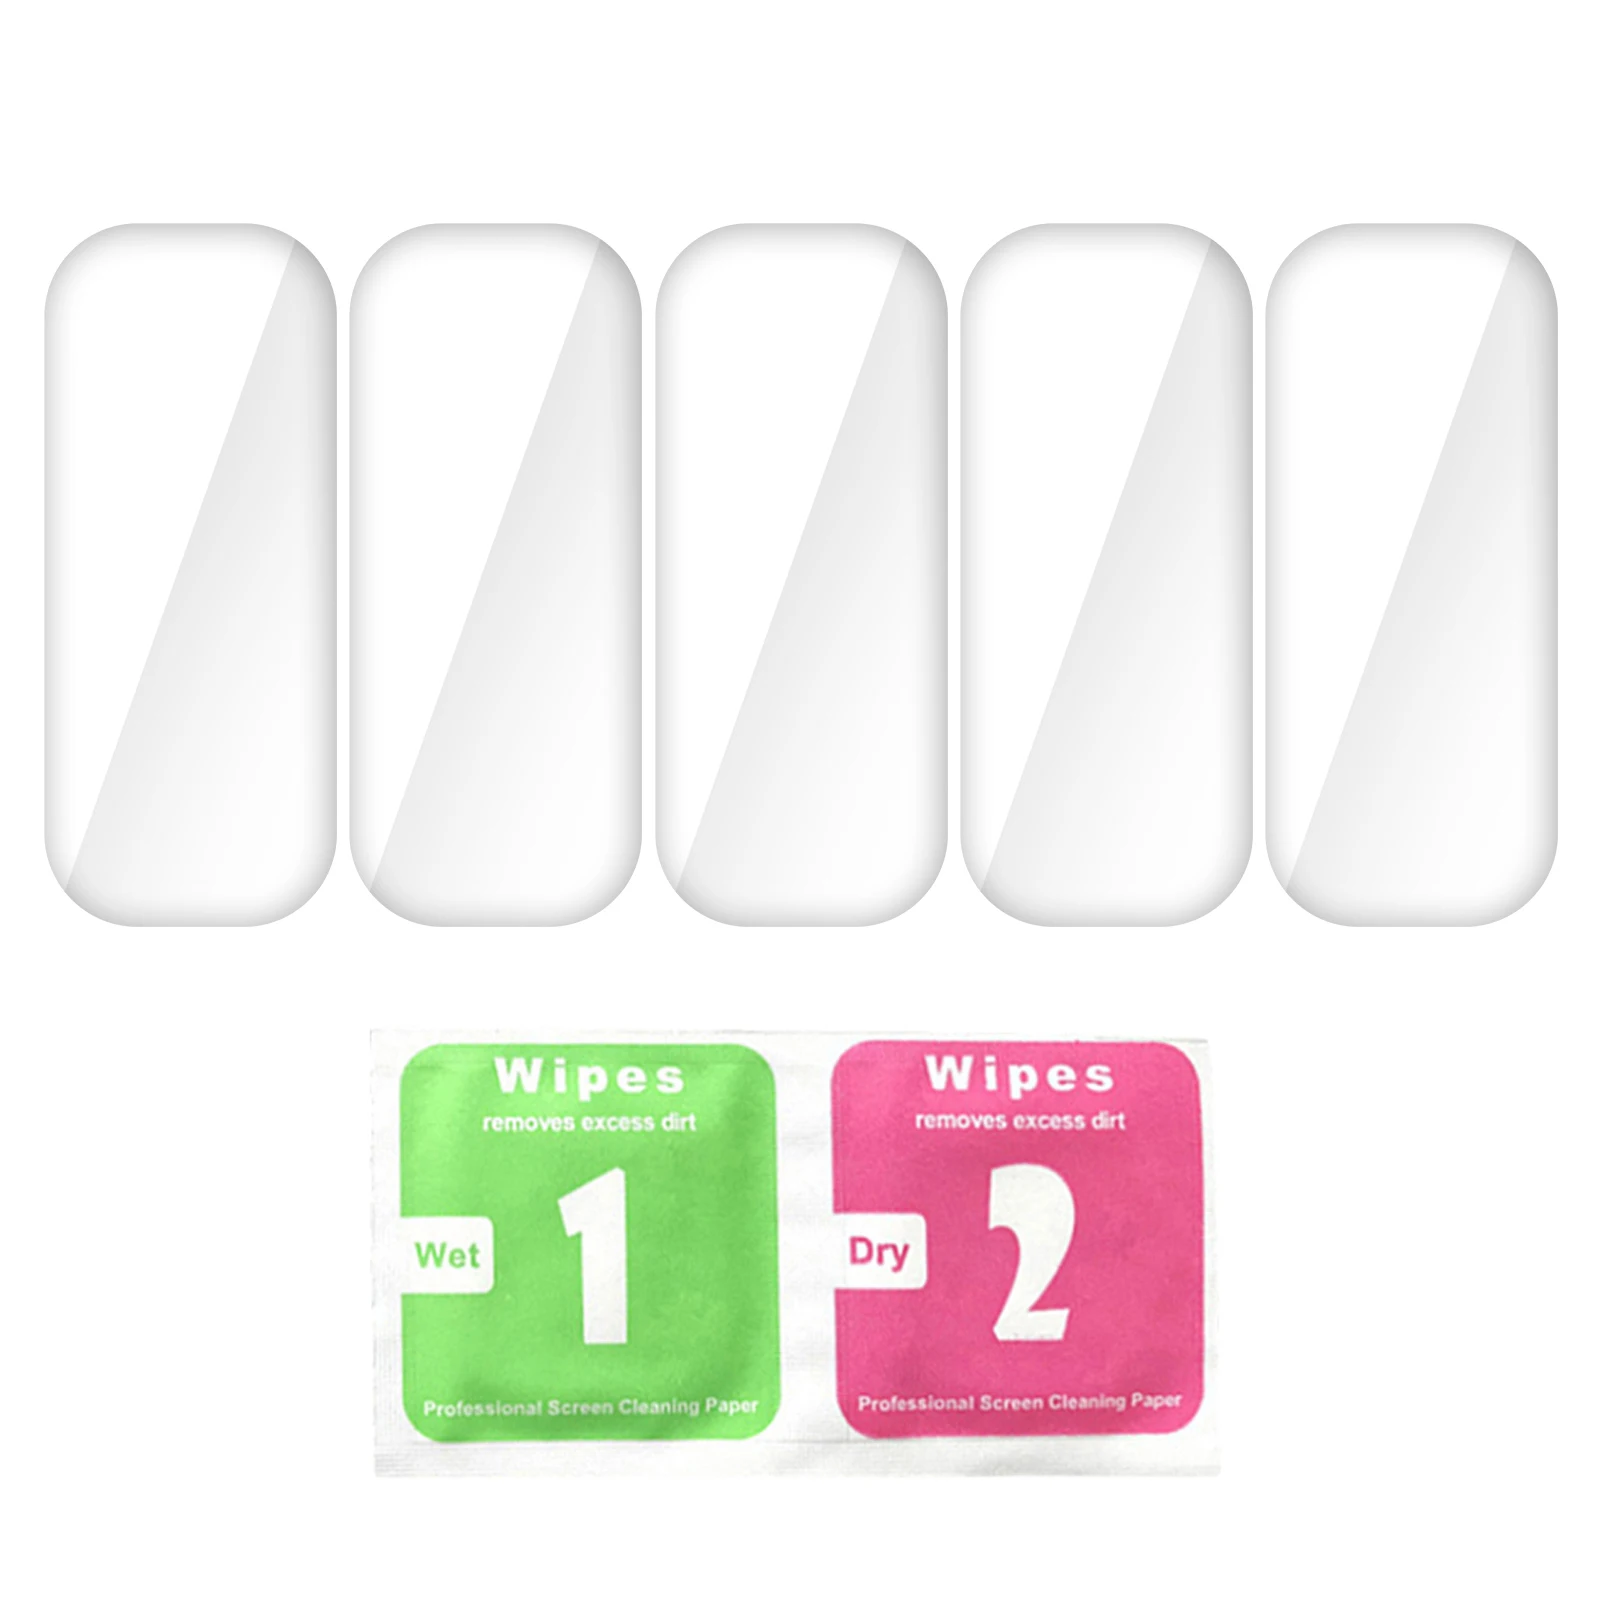 

10pcs Soft TPU Clear Smartband Protective Film For Samsung Galaxy Fit 2 SM-R220 Smart Wristband Fit2 R220 Screen Protector Cover